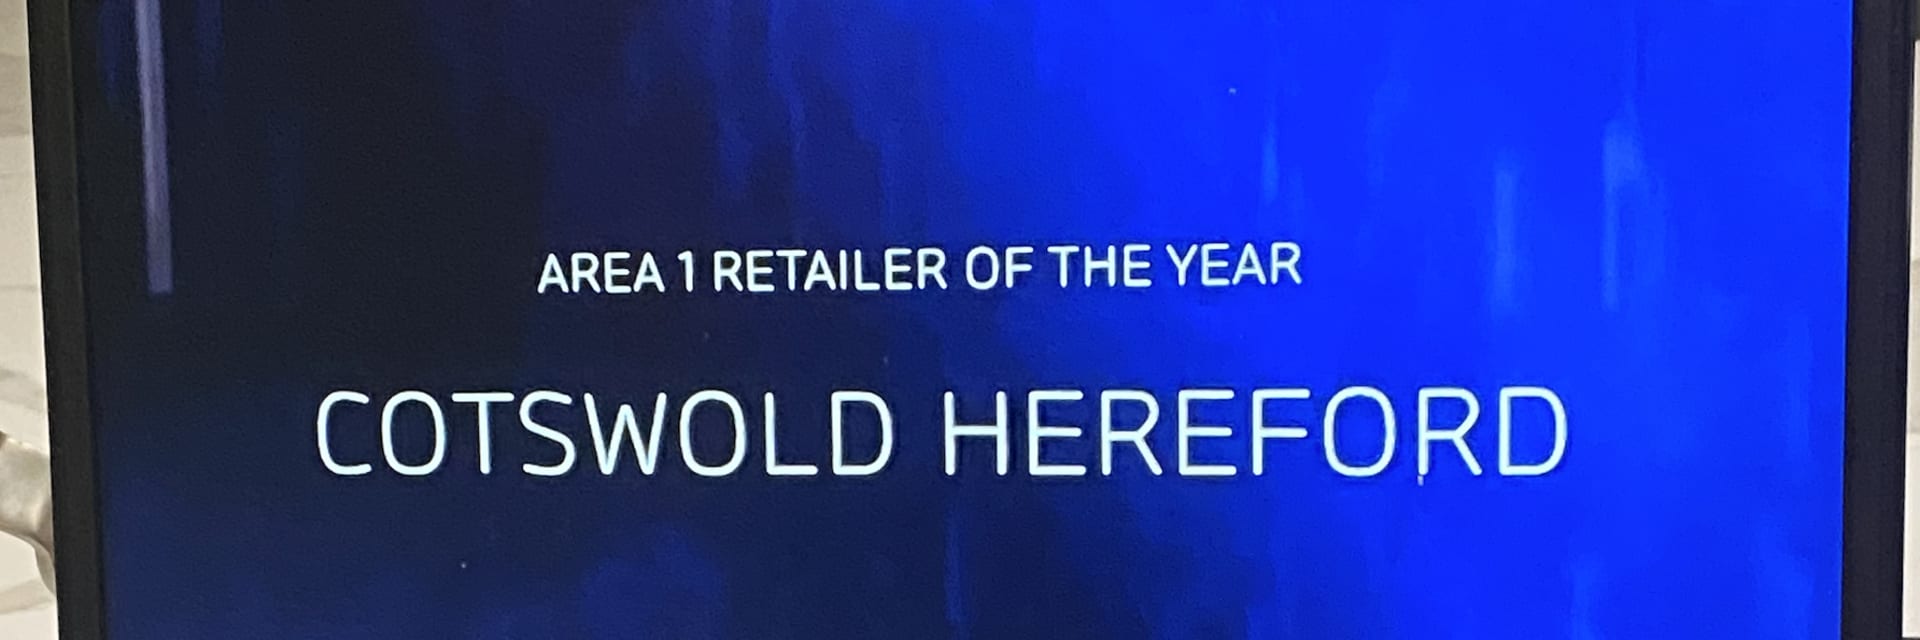 AREA 1 BMW RETAILER OF THE YEAR